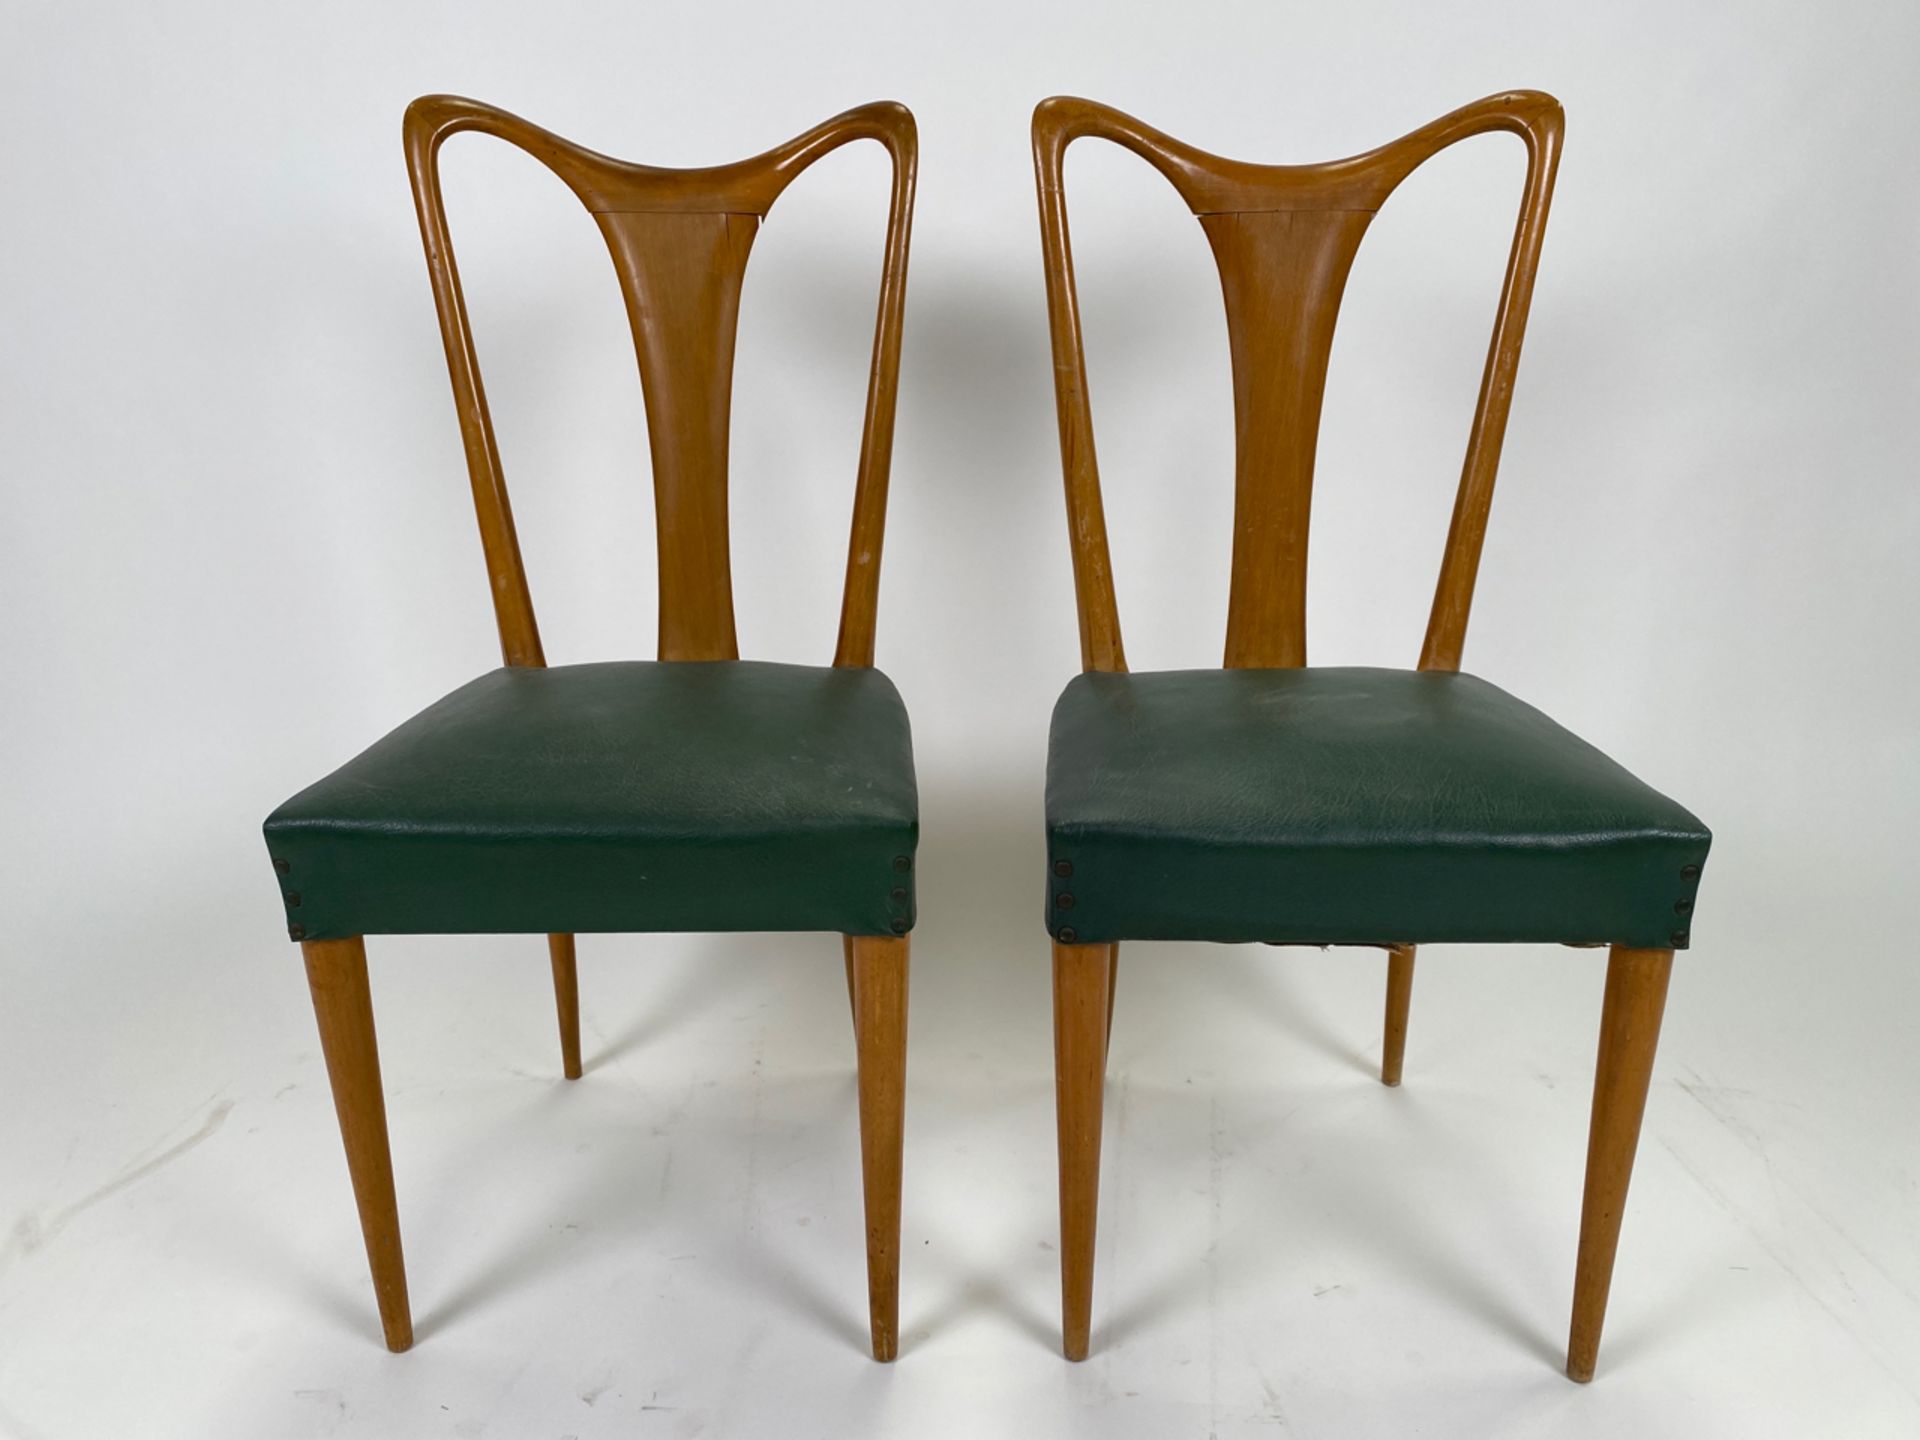 Pair of Ico Parisi Mid-Century Leather Chairs - Image 2 of 8